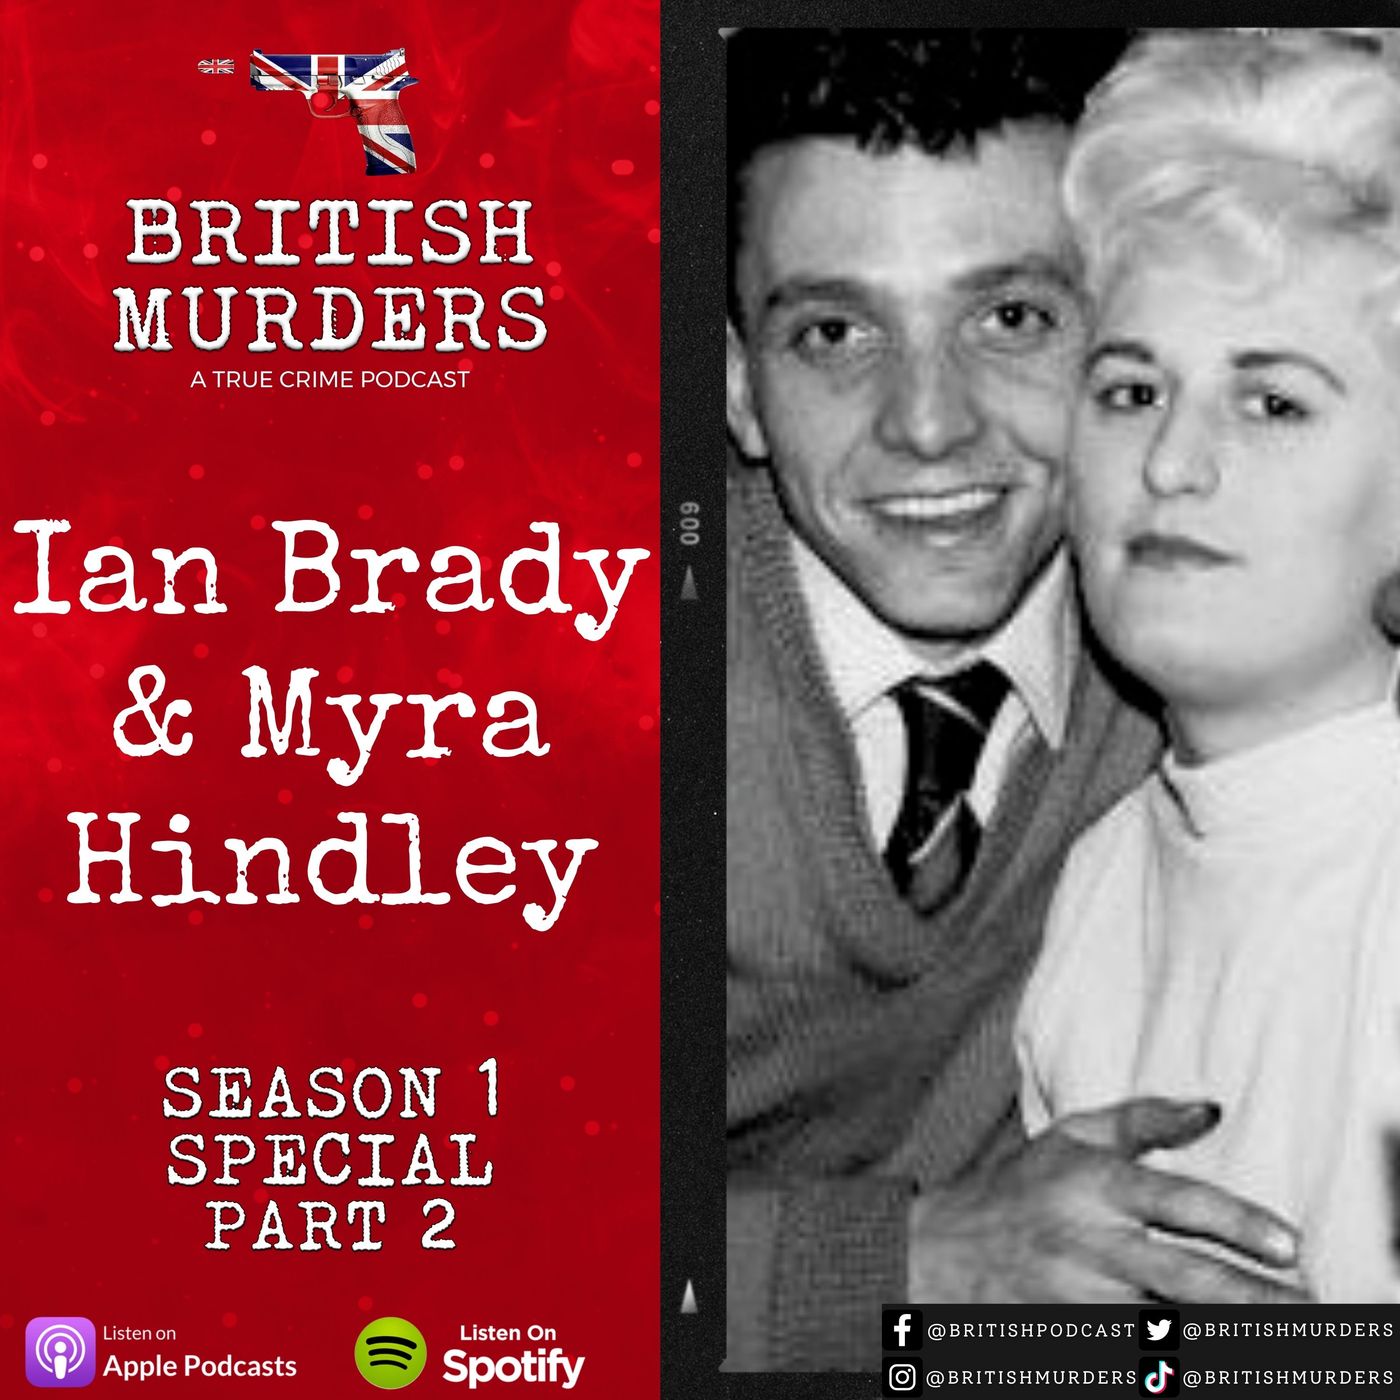 S01E11 - Special (Part 2) - "The Moors Murderers" Ian Brady and Myra Hindley Image